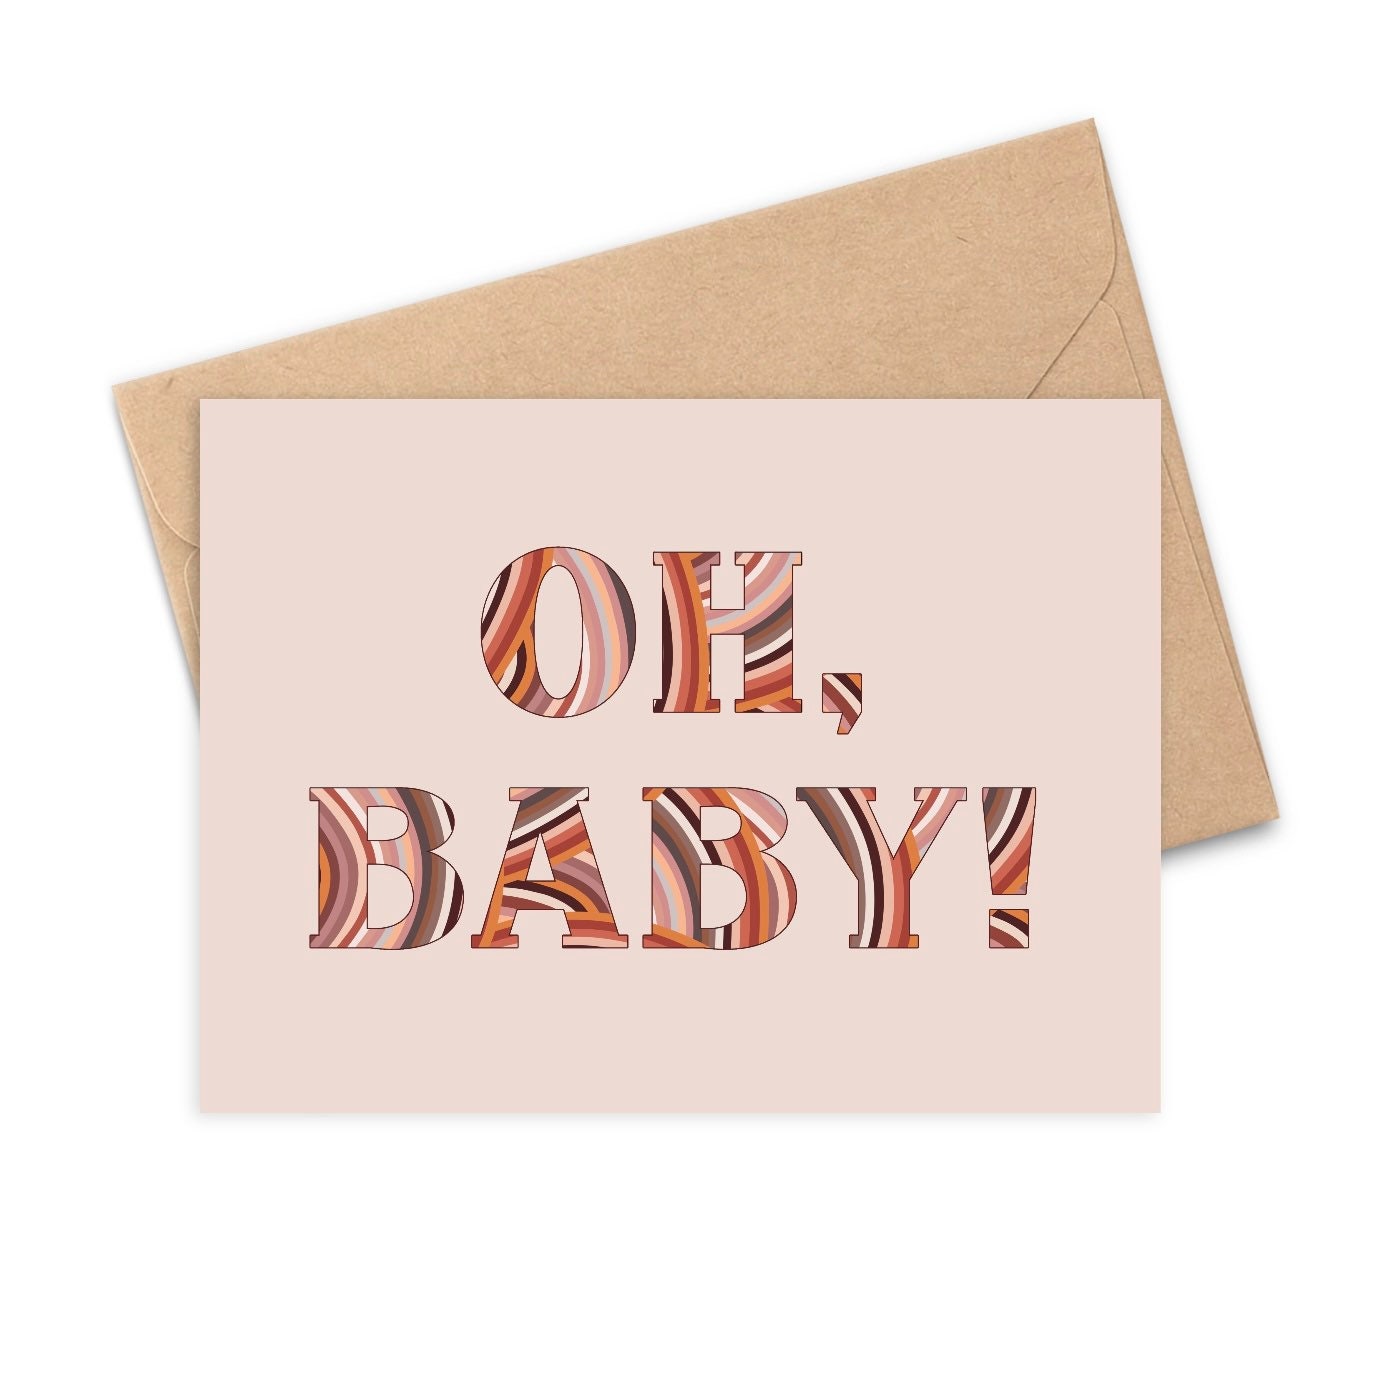 Shades of beige, blush and terra cotta are the main colors here, but the card does not specify any gender so it also makes a great gender-neutral baby card. The abstract design was digitally drawn by hand locally in Chicago, IL!